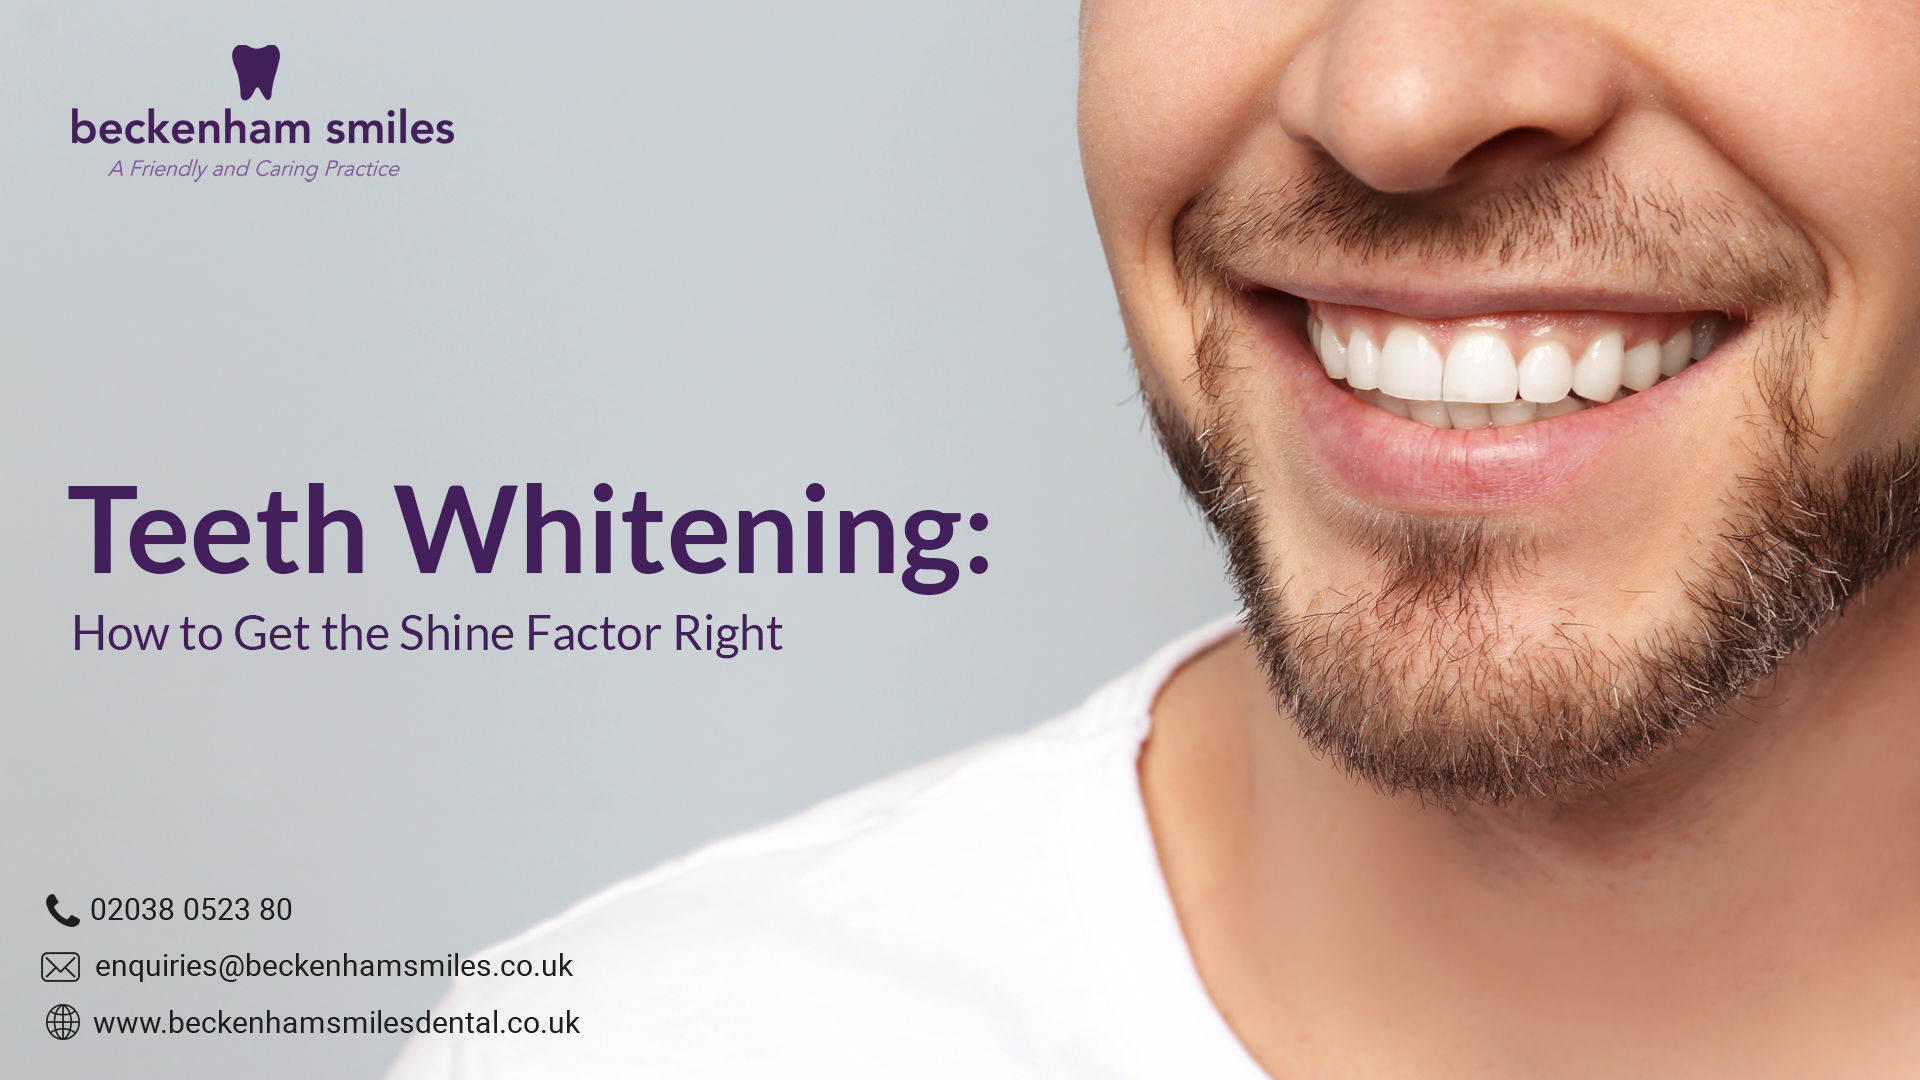 Teeth Whitening: How to Get the Shine Factor Right